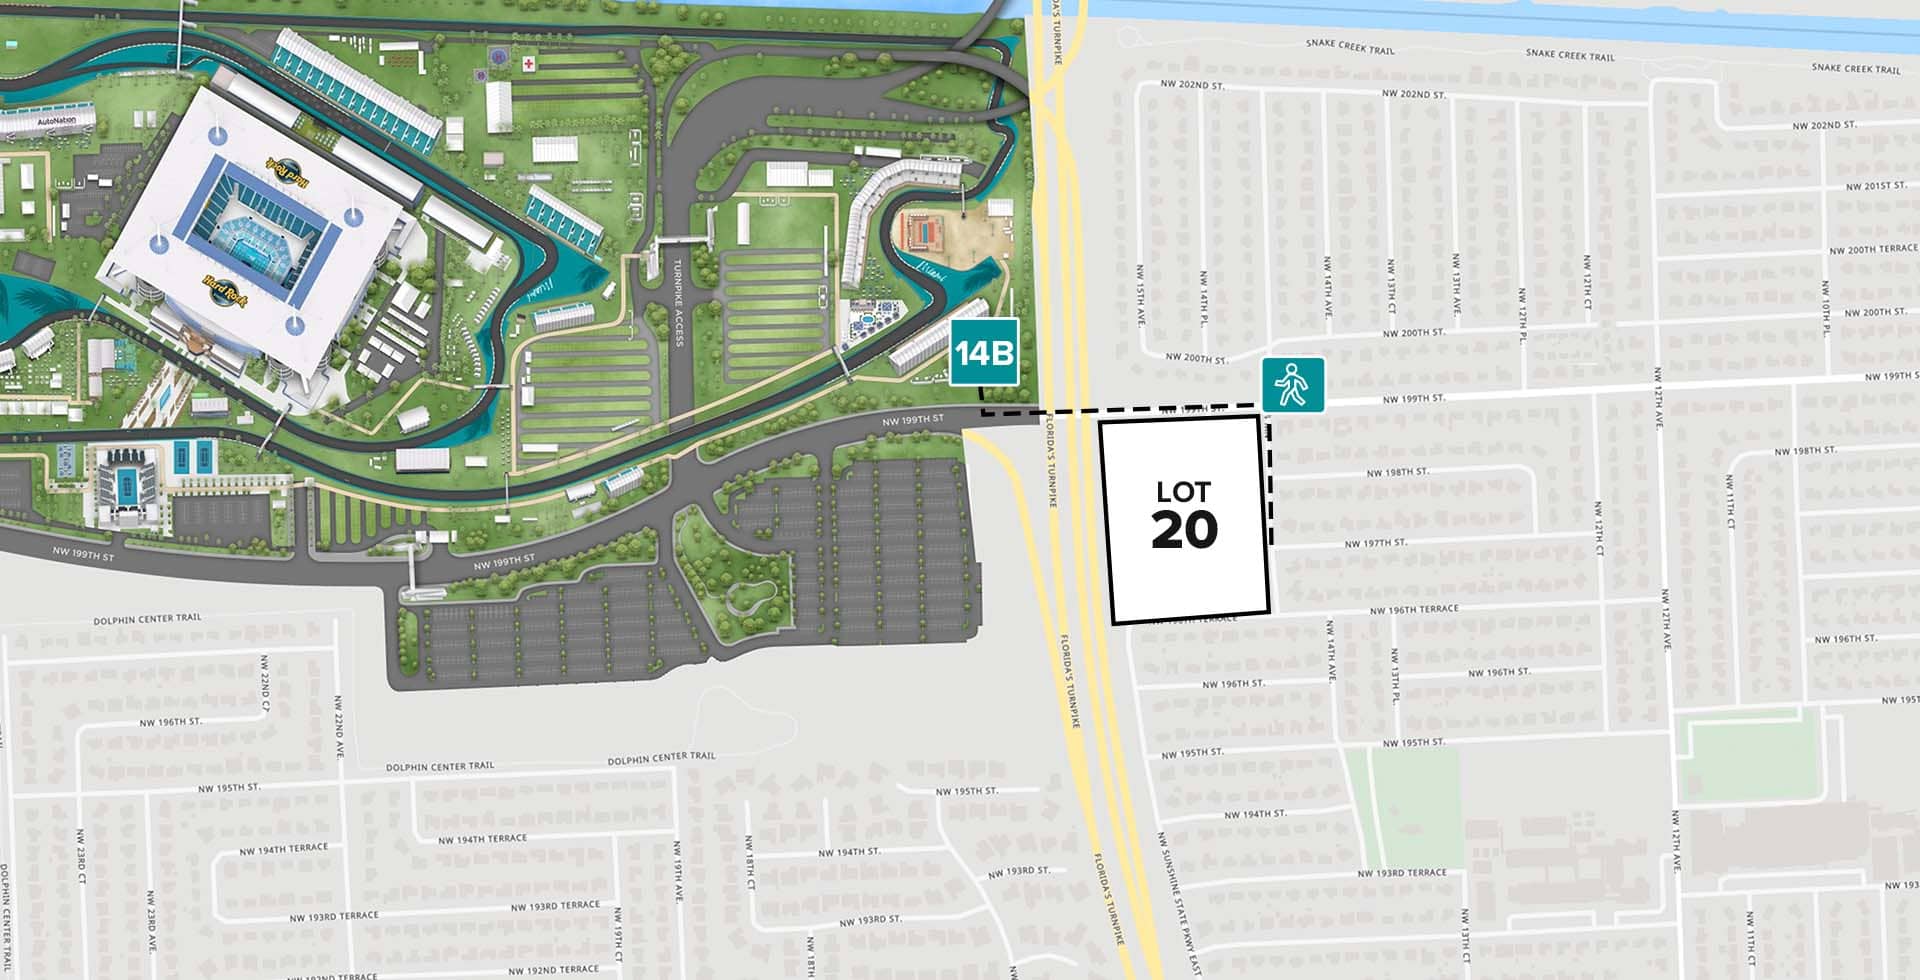 Parking Lot Location Map for White Lot 20 at the Formula 1 Crypto.com Miami Grand Prix